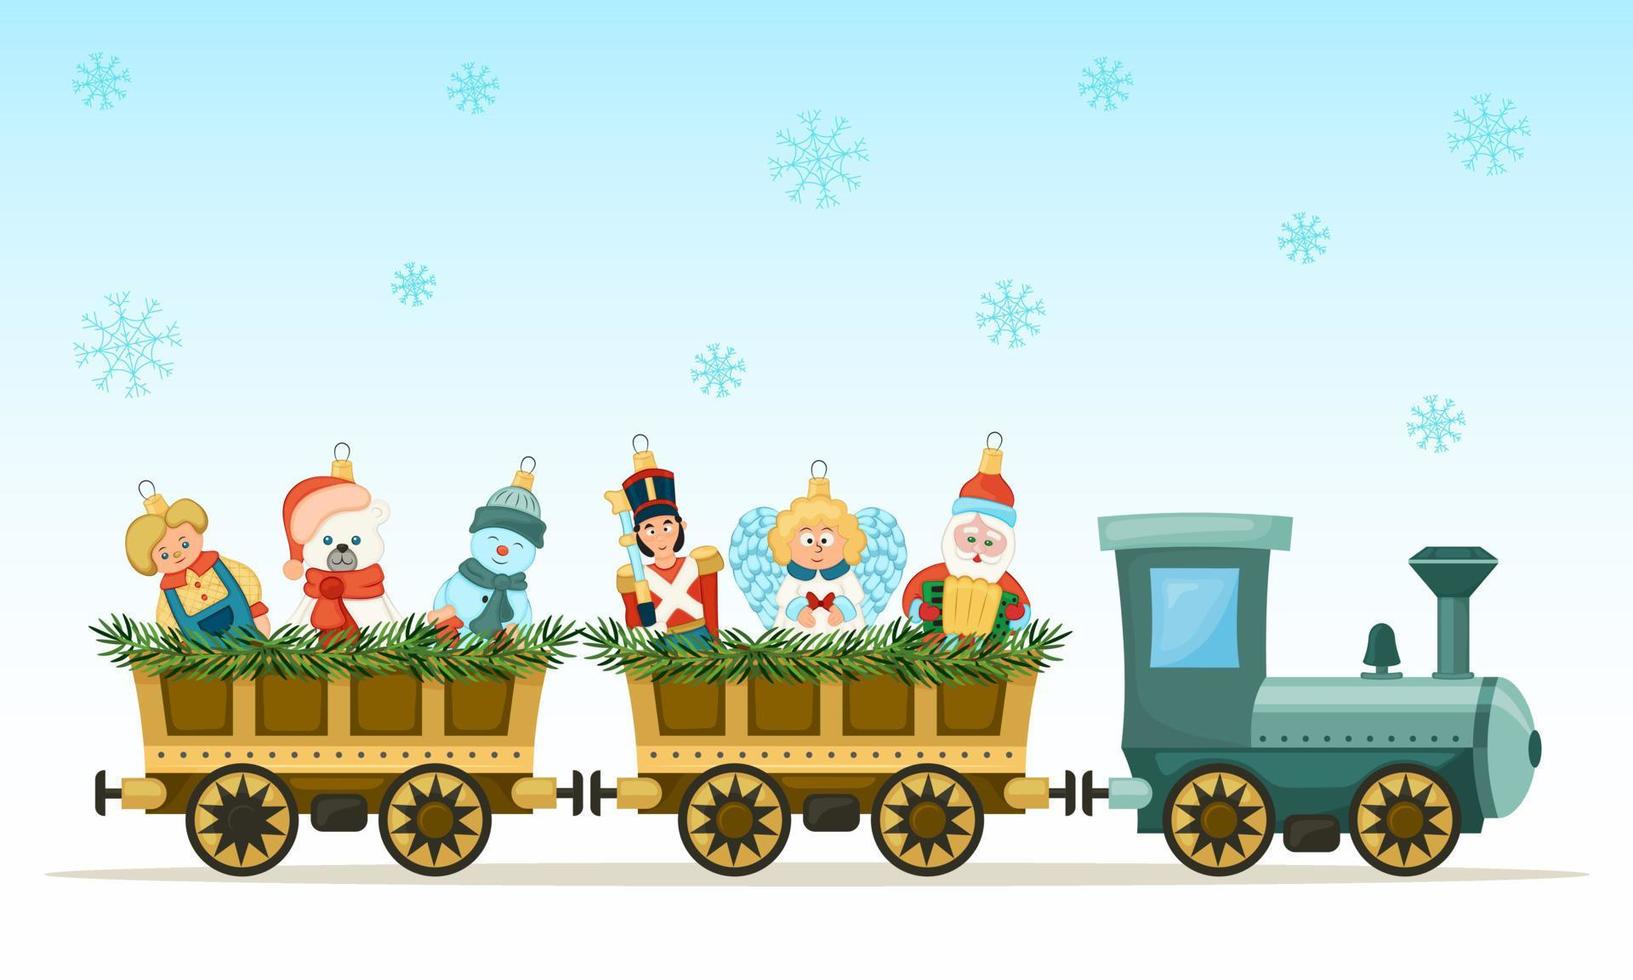 Cute Christmas train carrying Christmas toys and decorations against a backdrop of falling snowflakes. Vector illustration.